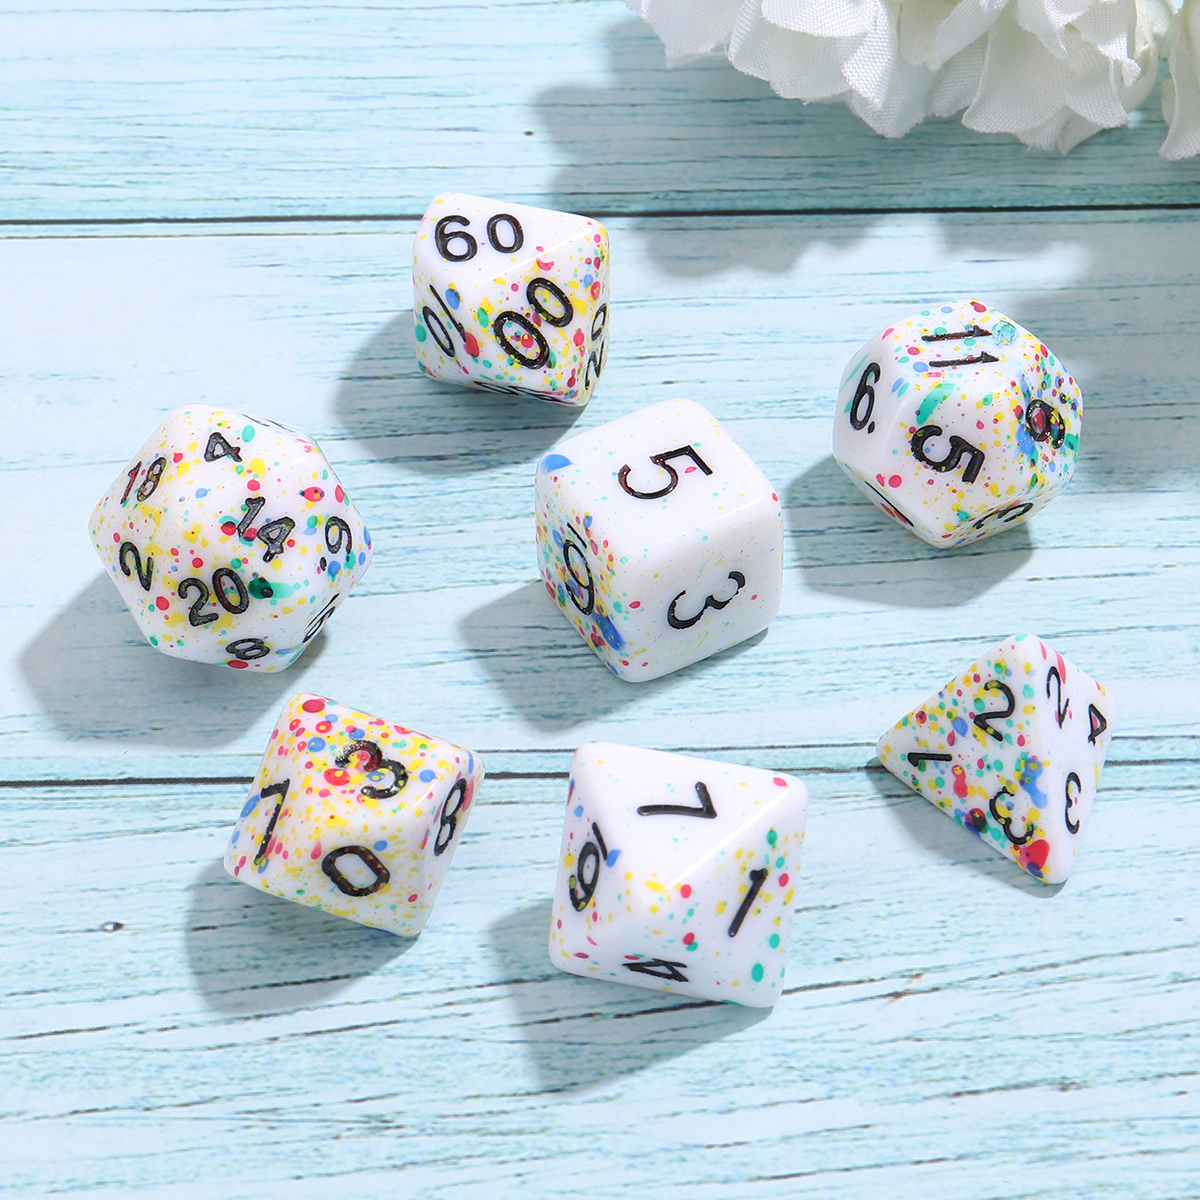 7Pcs-Acrylic-Polyhedral-Dice-Set-Colorful-Board-Game-Multisided-Dices-Gadget-1690588-4